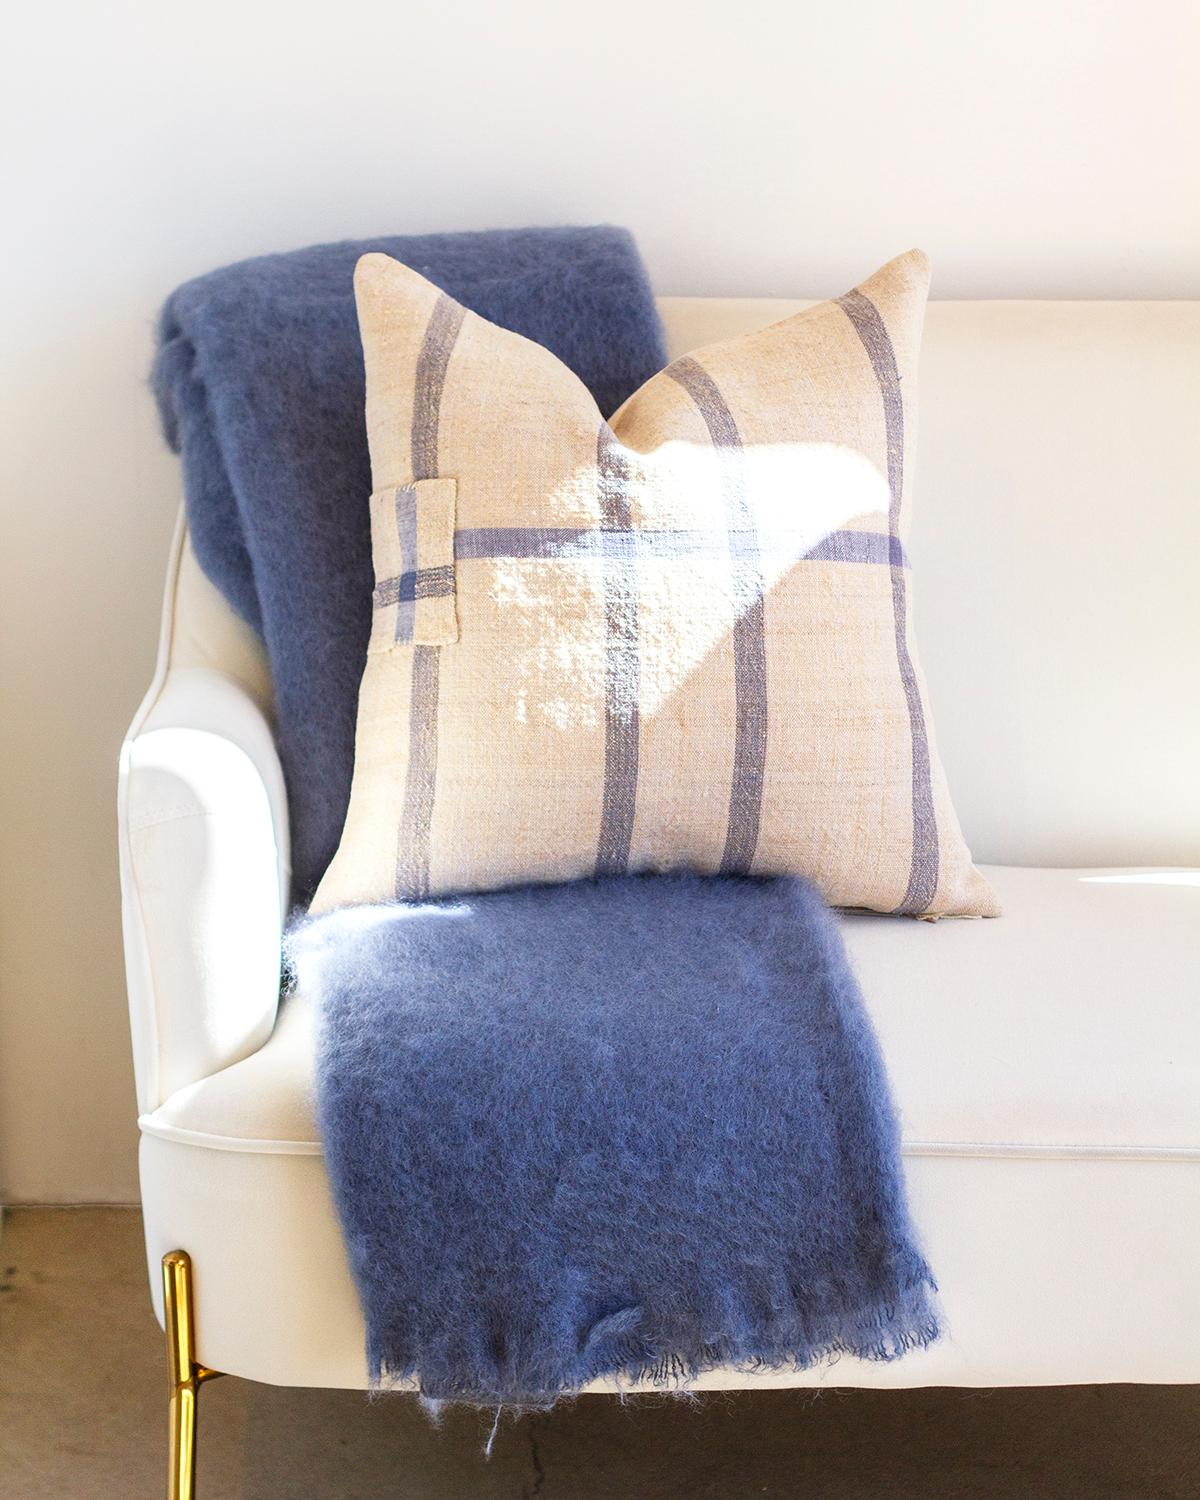 One of a kind vintage linen throw pillows to beautify your home. A hundred years ago these fabrics used to be cereal sacks in Northern Portugal. Now they get rediscovered and transformed into a rare collectible.

This Matilde Blue Checkered Throw